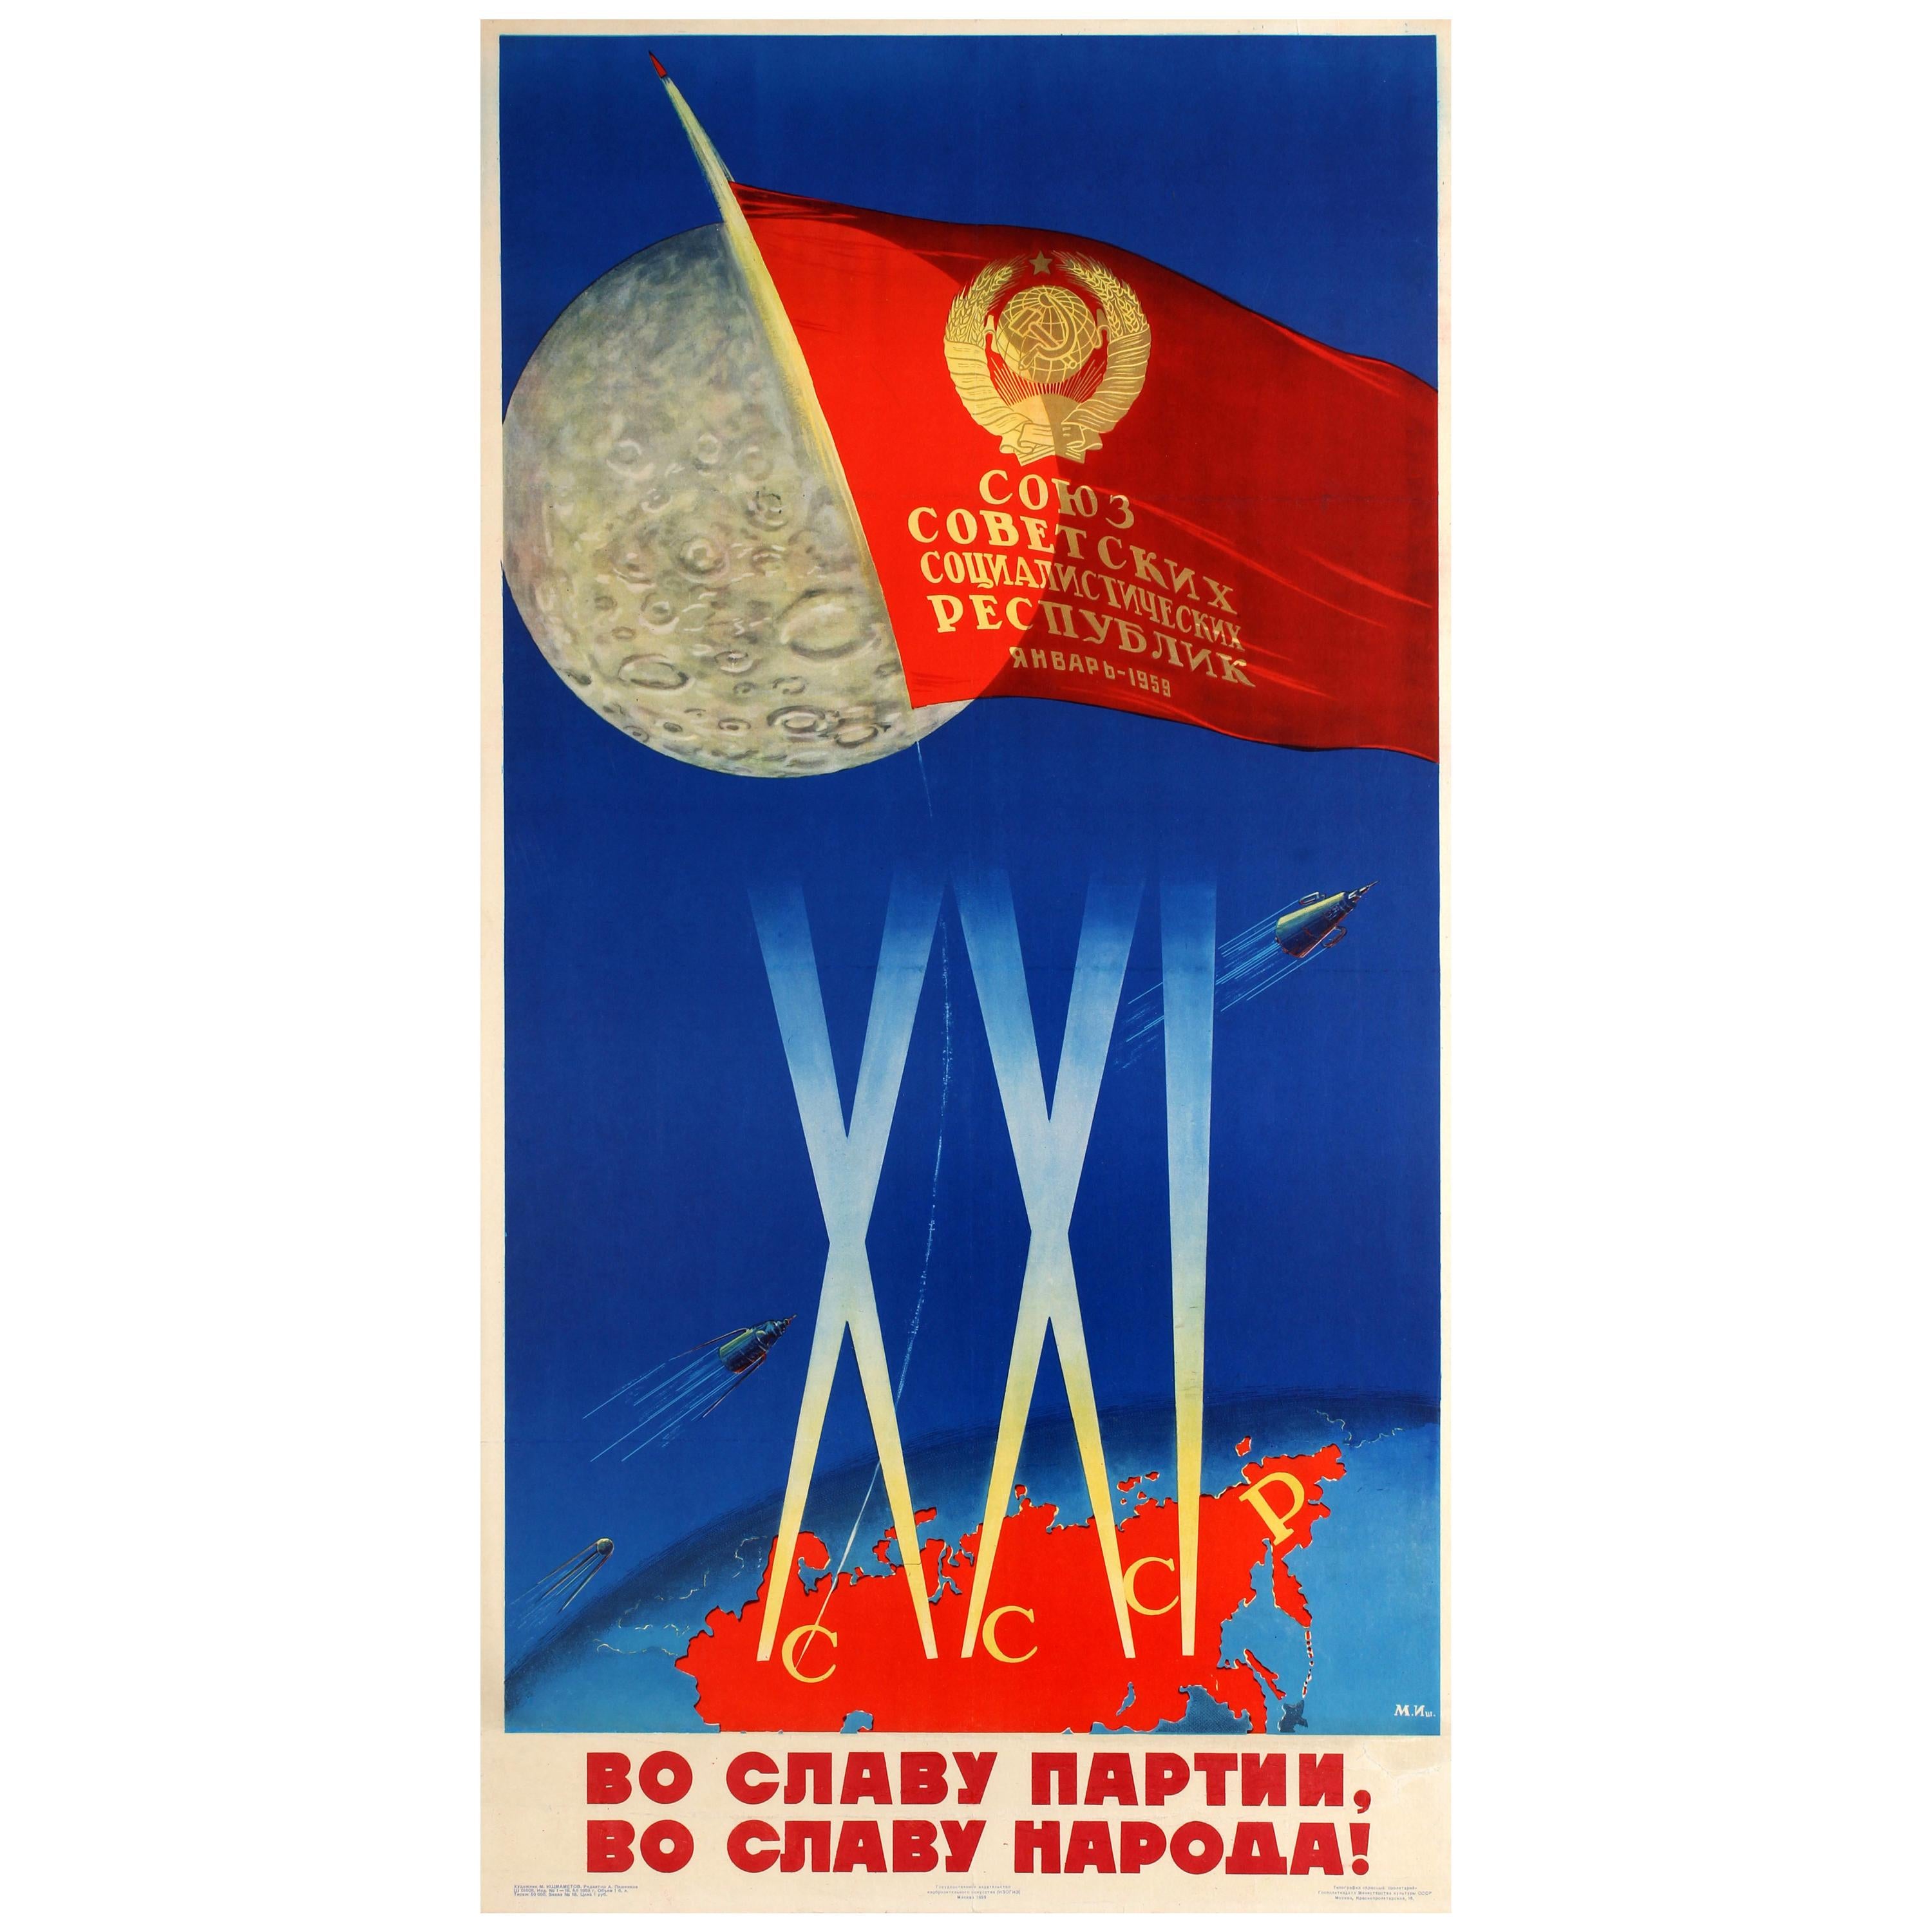 Original Vintage Soviet Propaganda Space Poster - USSR in the Glory of the Party